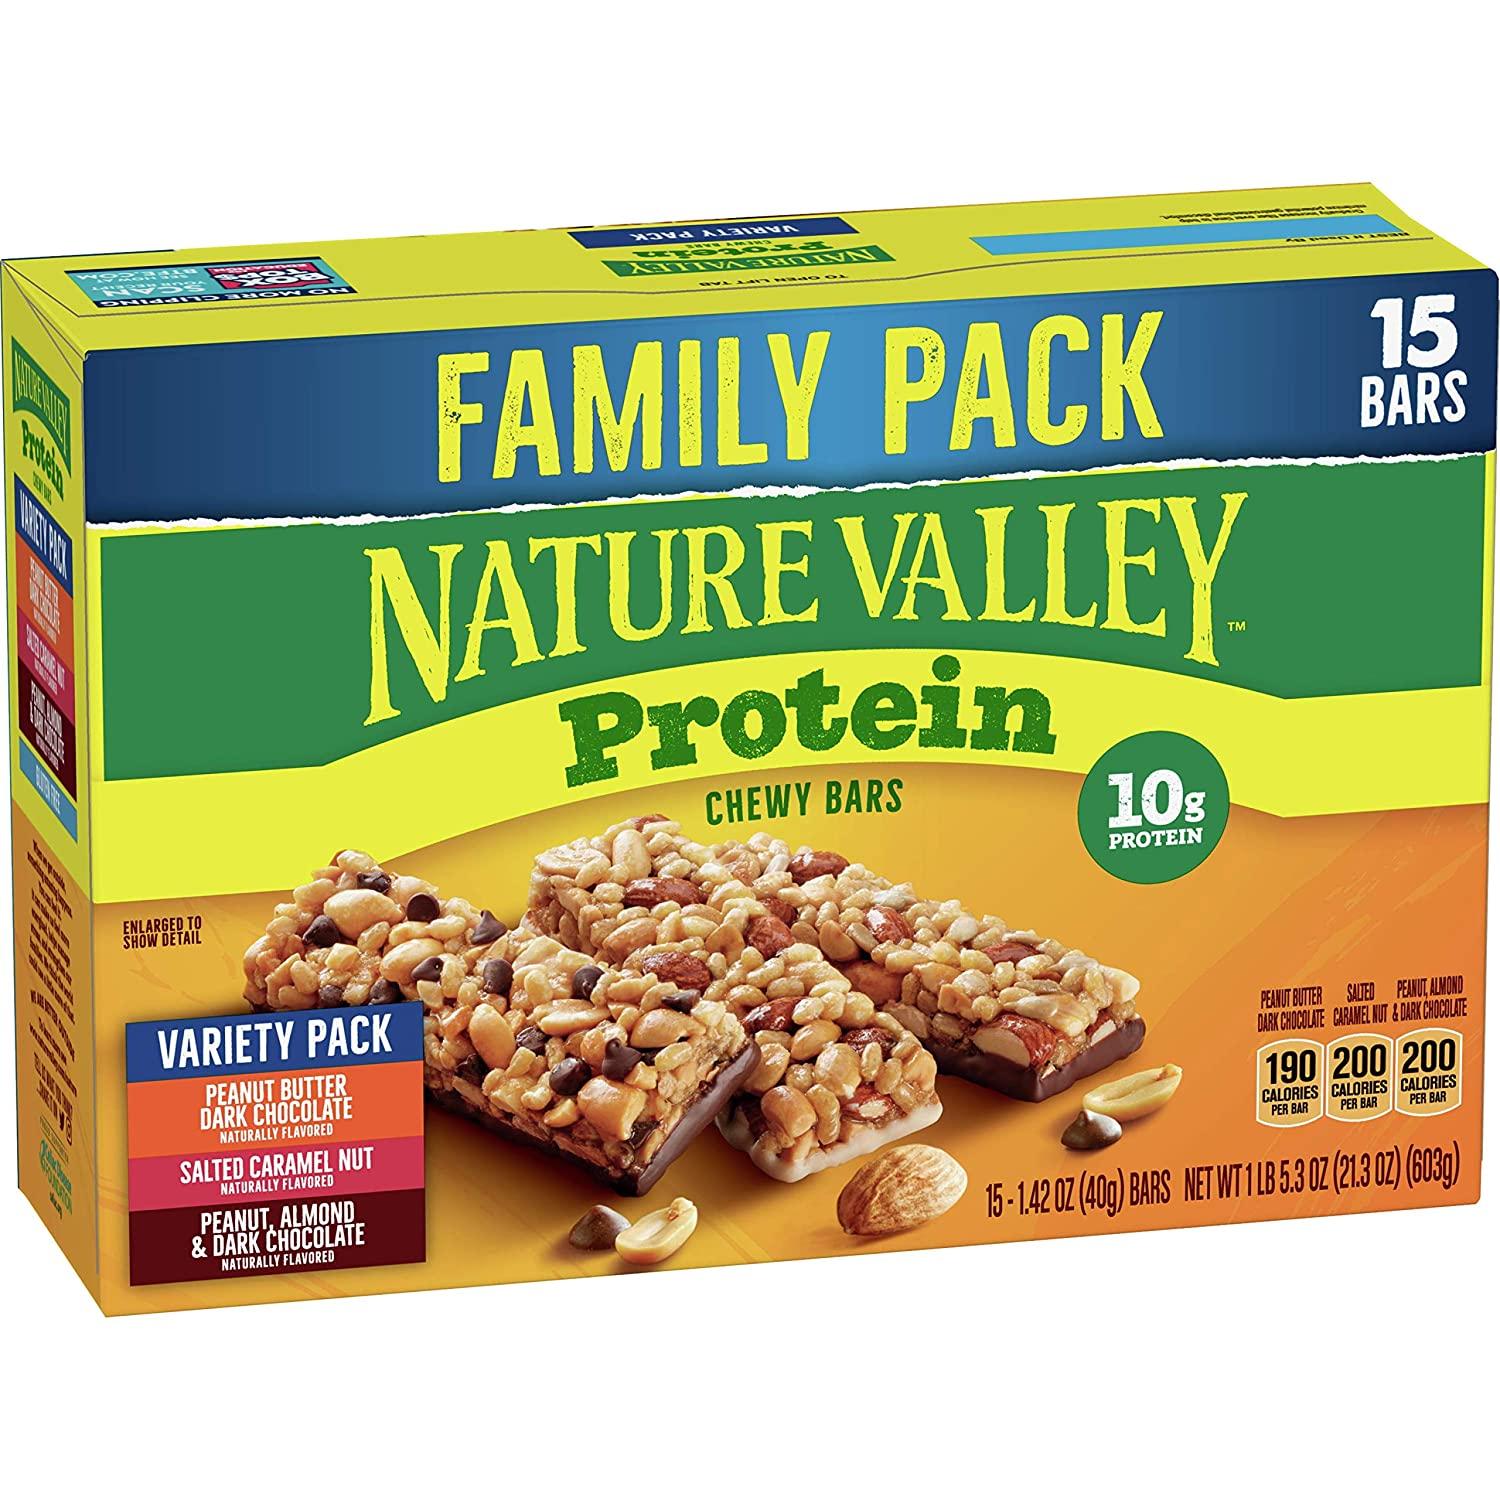 15 Nature Valley Chewy Protein Bars for $6.18 Shipped